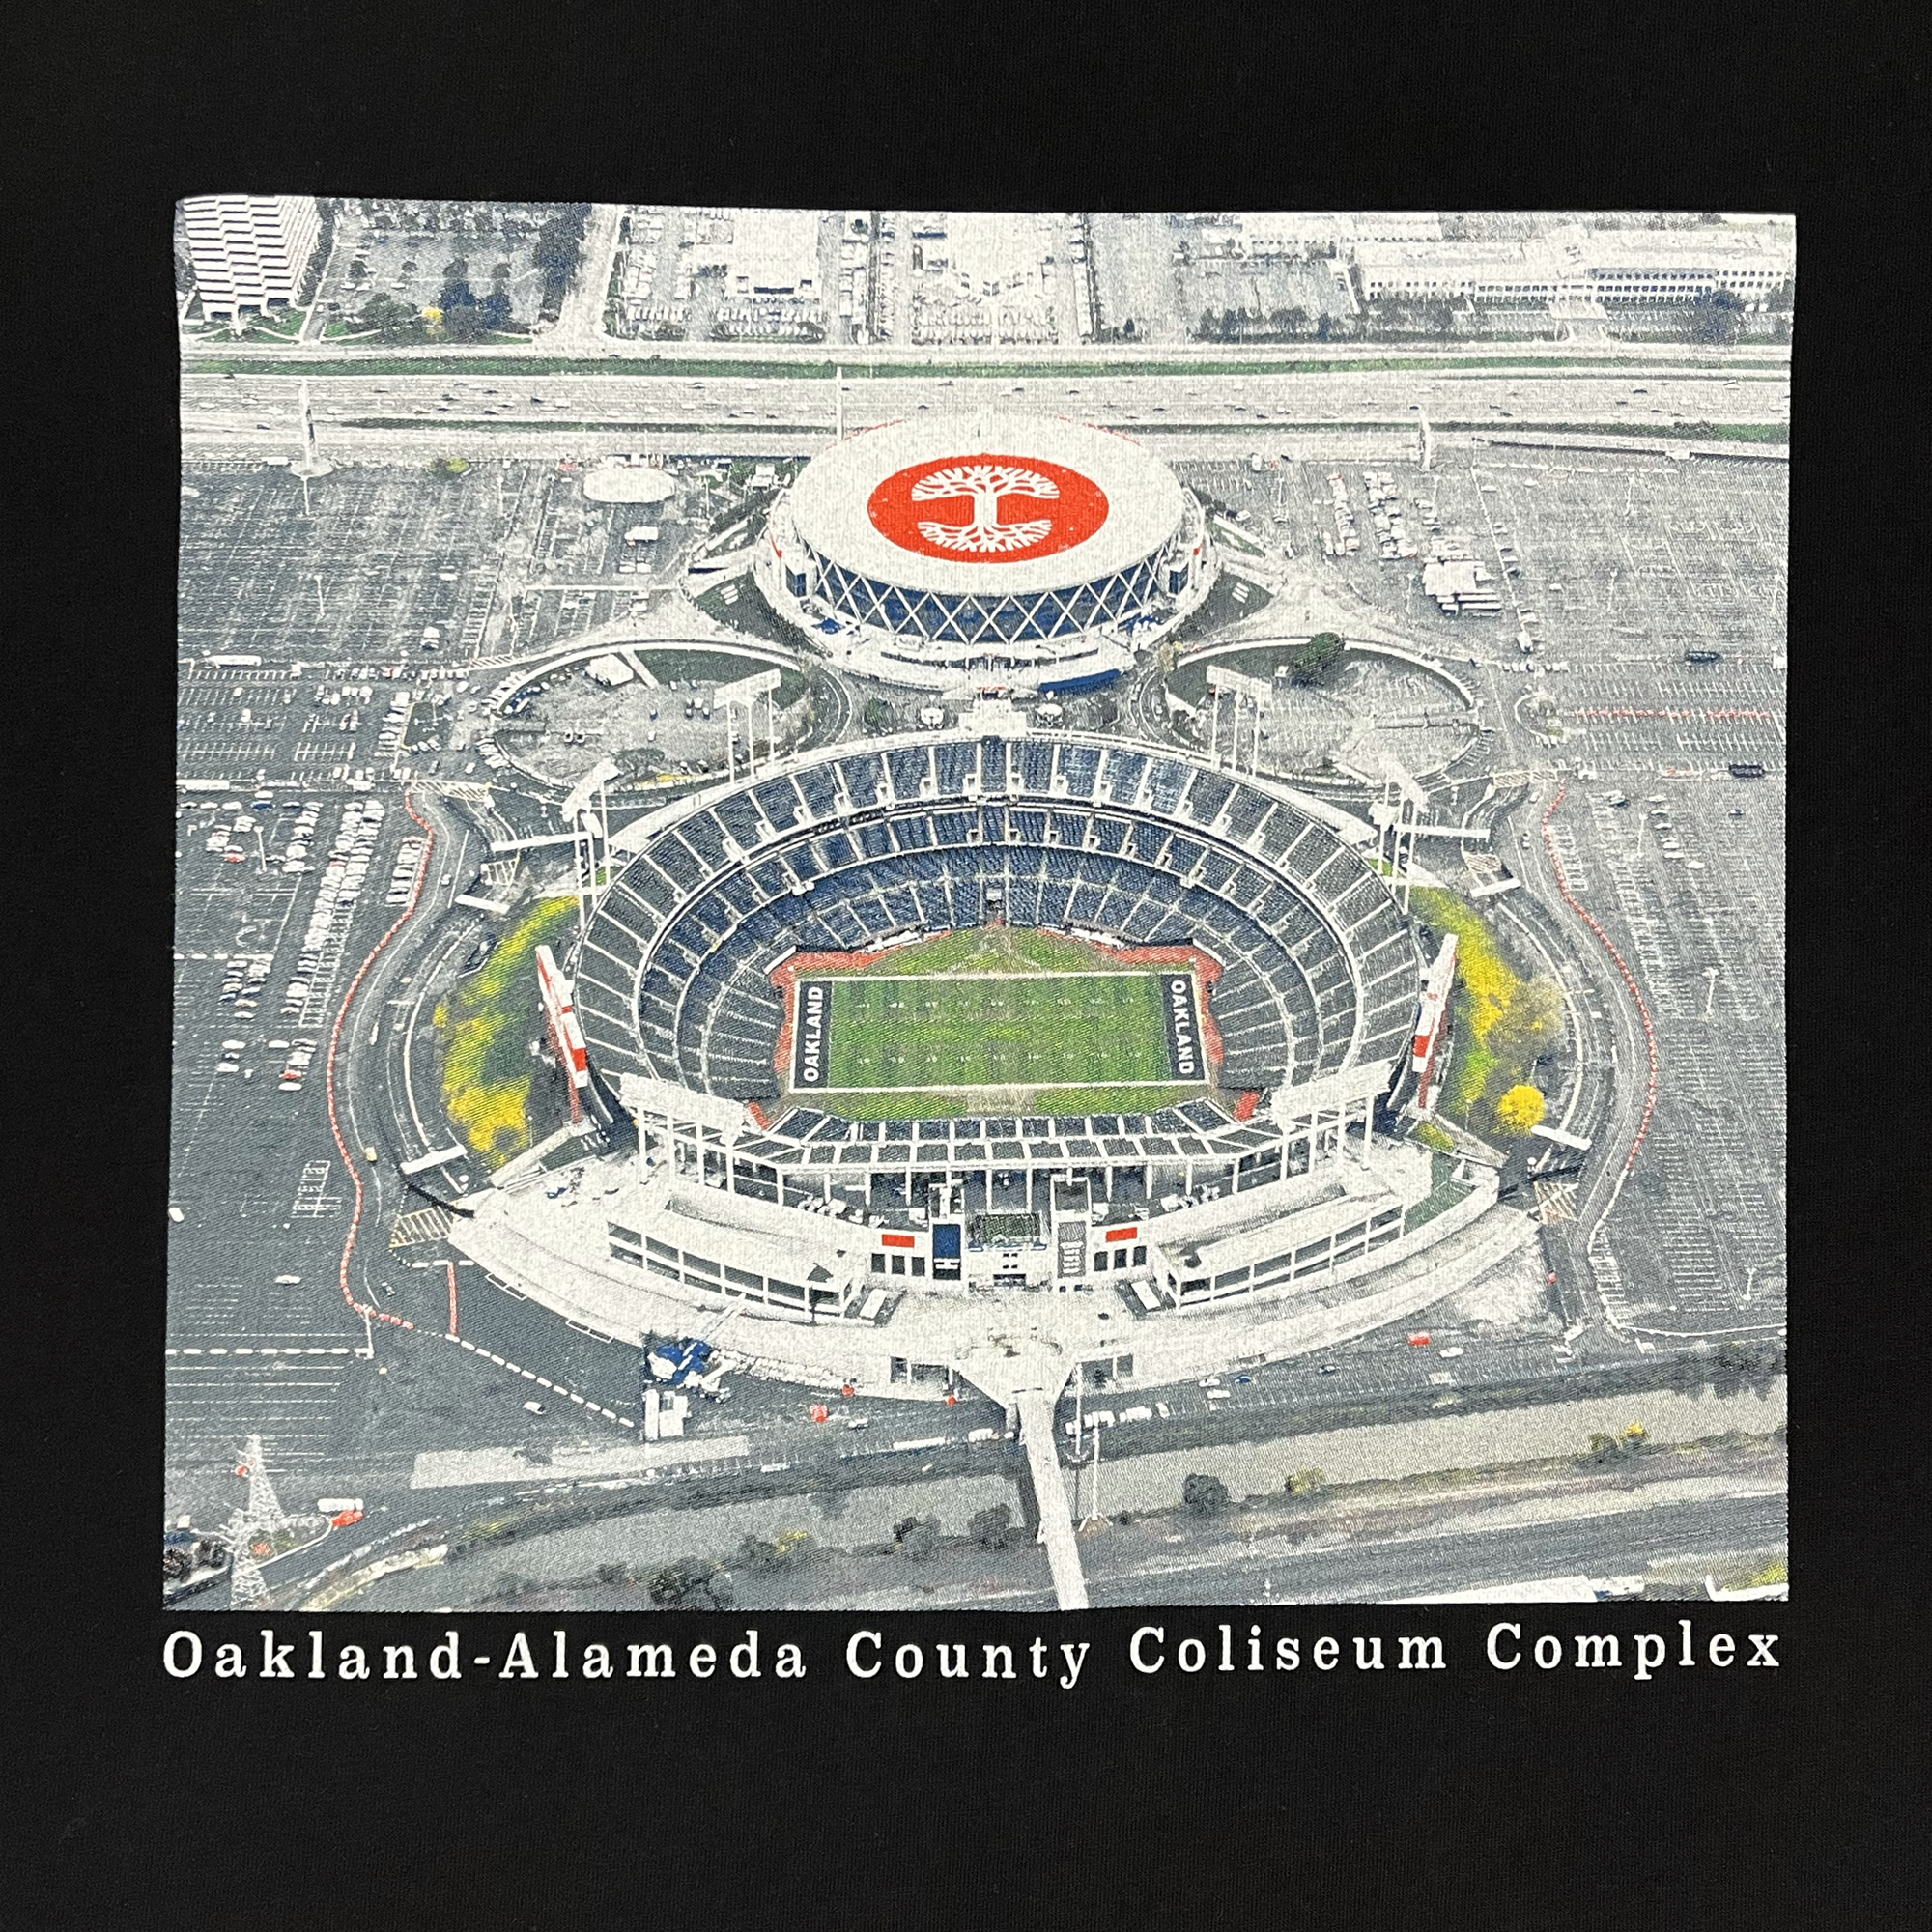 Close-up picture of Oakland Alameda County Coliseum Complex on front chest of black t-shirt..